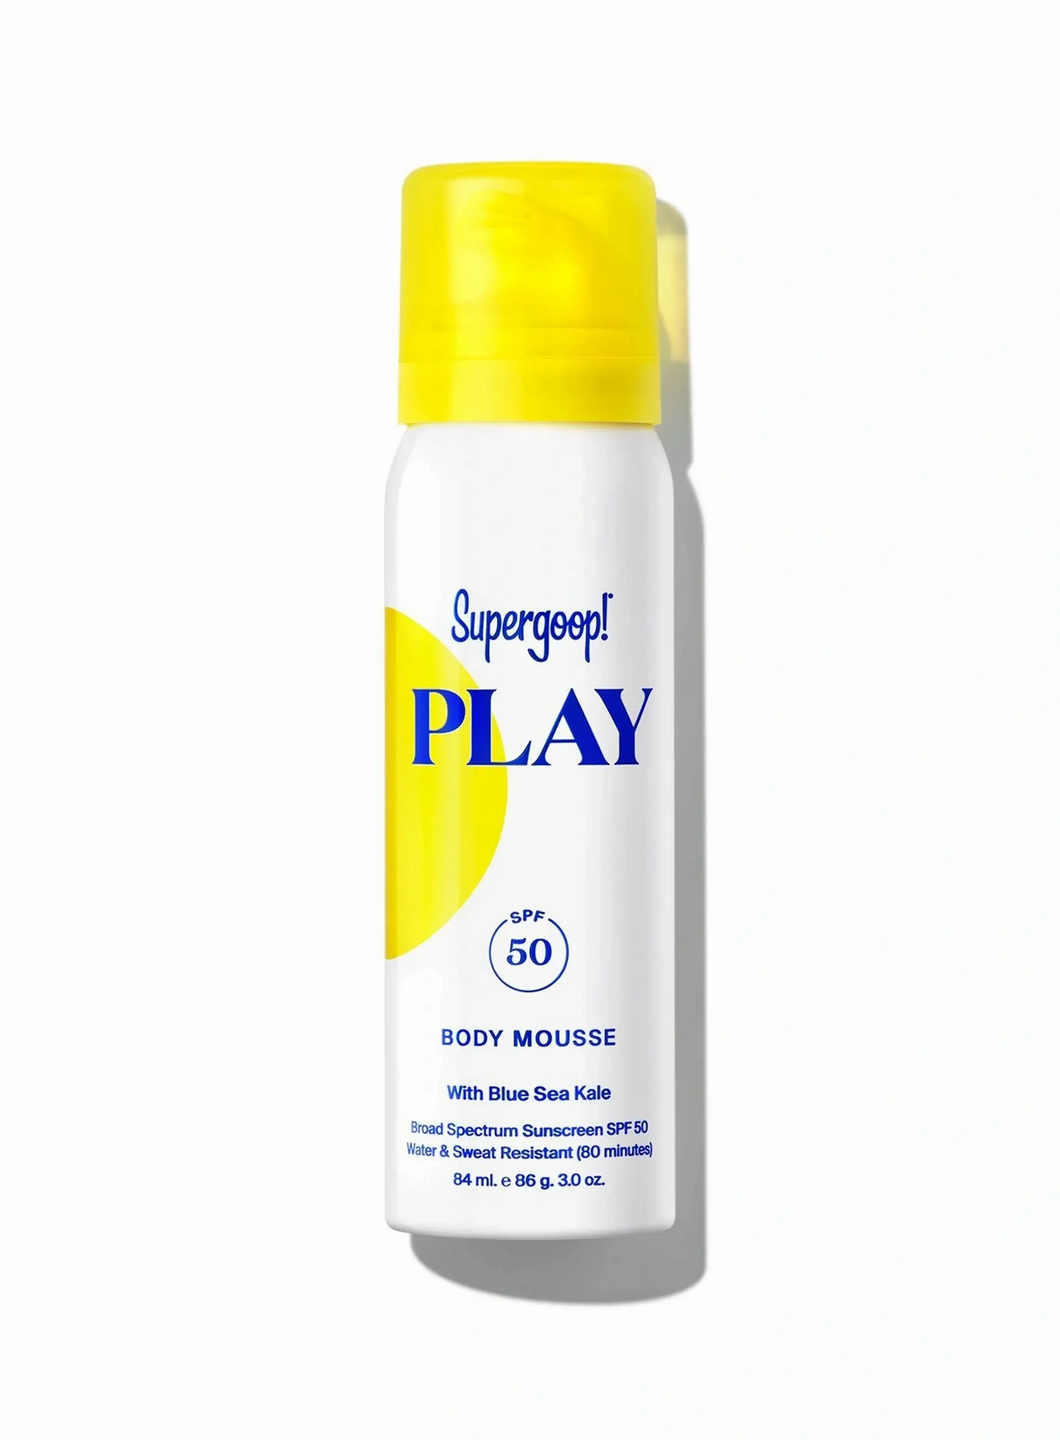 PLAY Body Mousse SPF 50 with Blue Sea Kale, 3oz